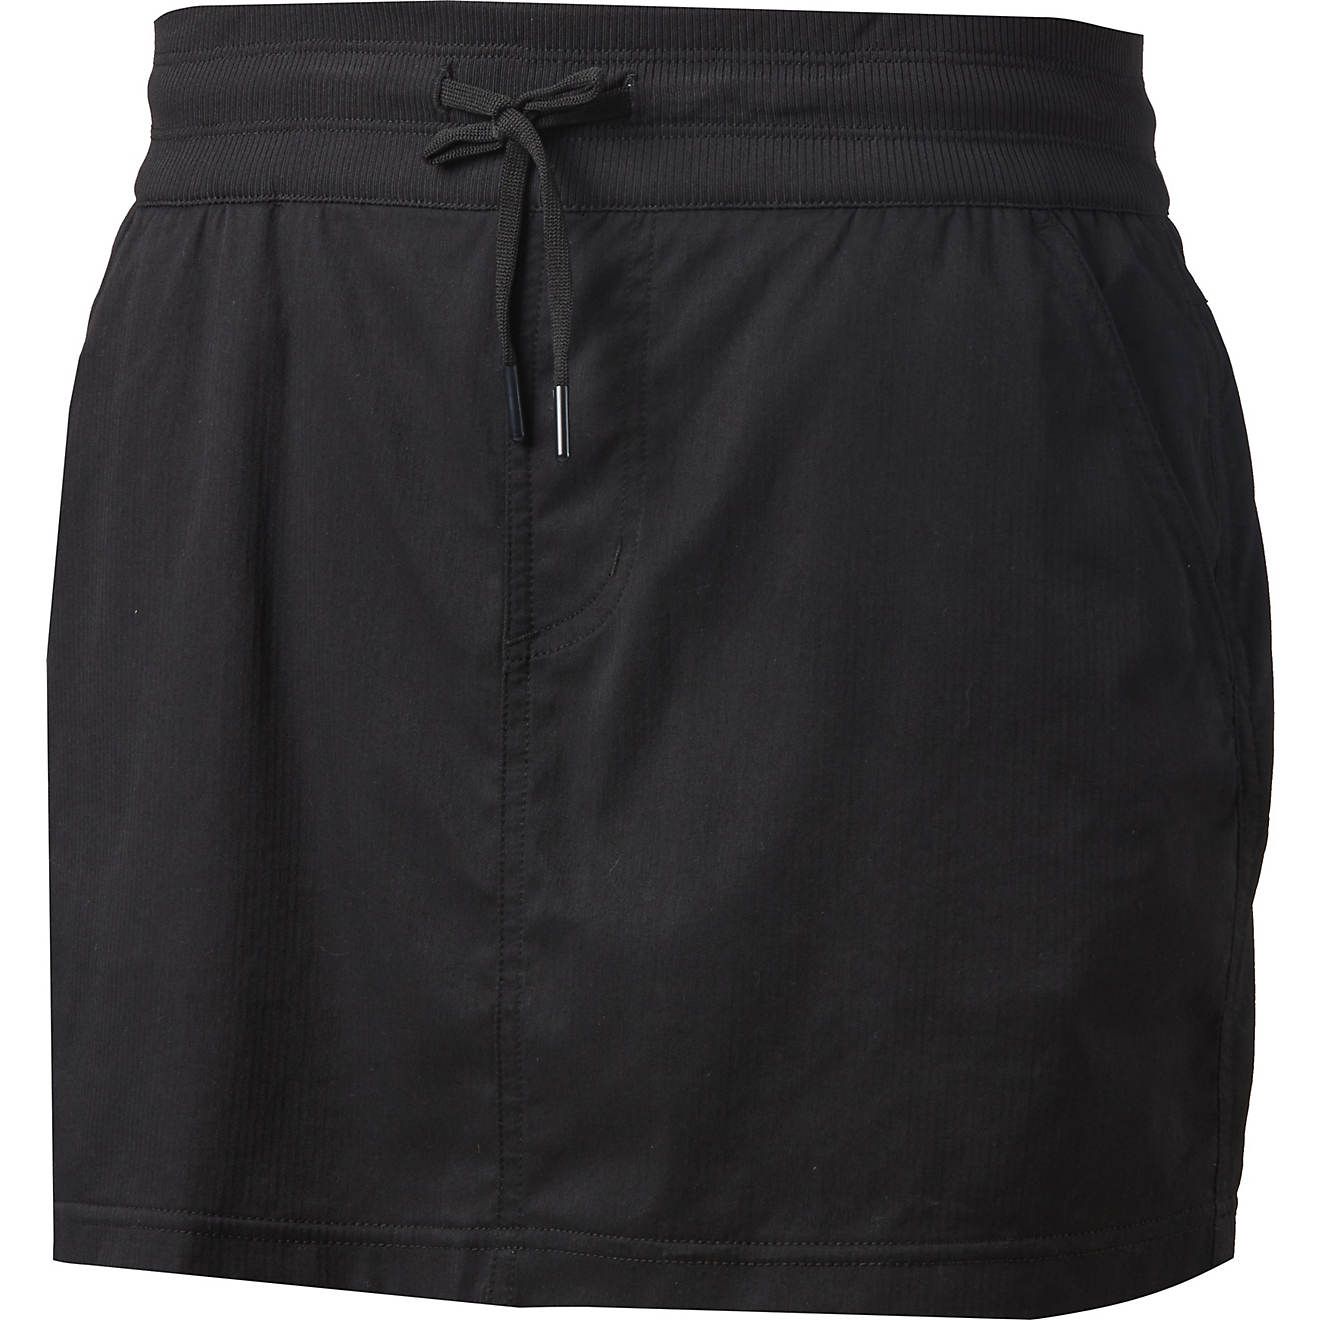 The North Face Women's Aphrodite Skort | Academy Sports + Outdoor Affiliate